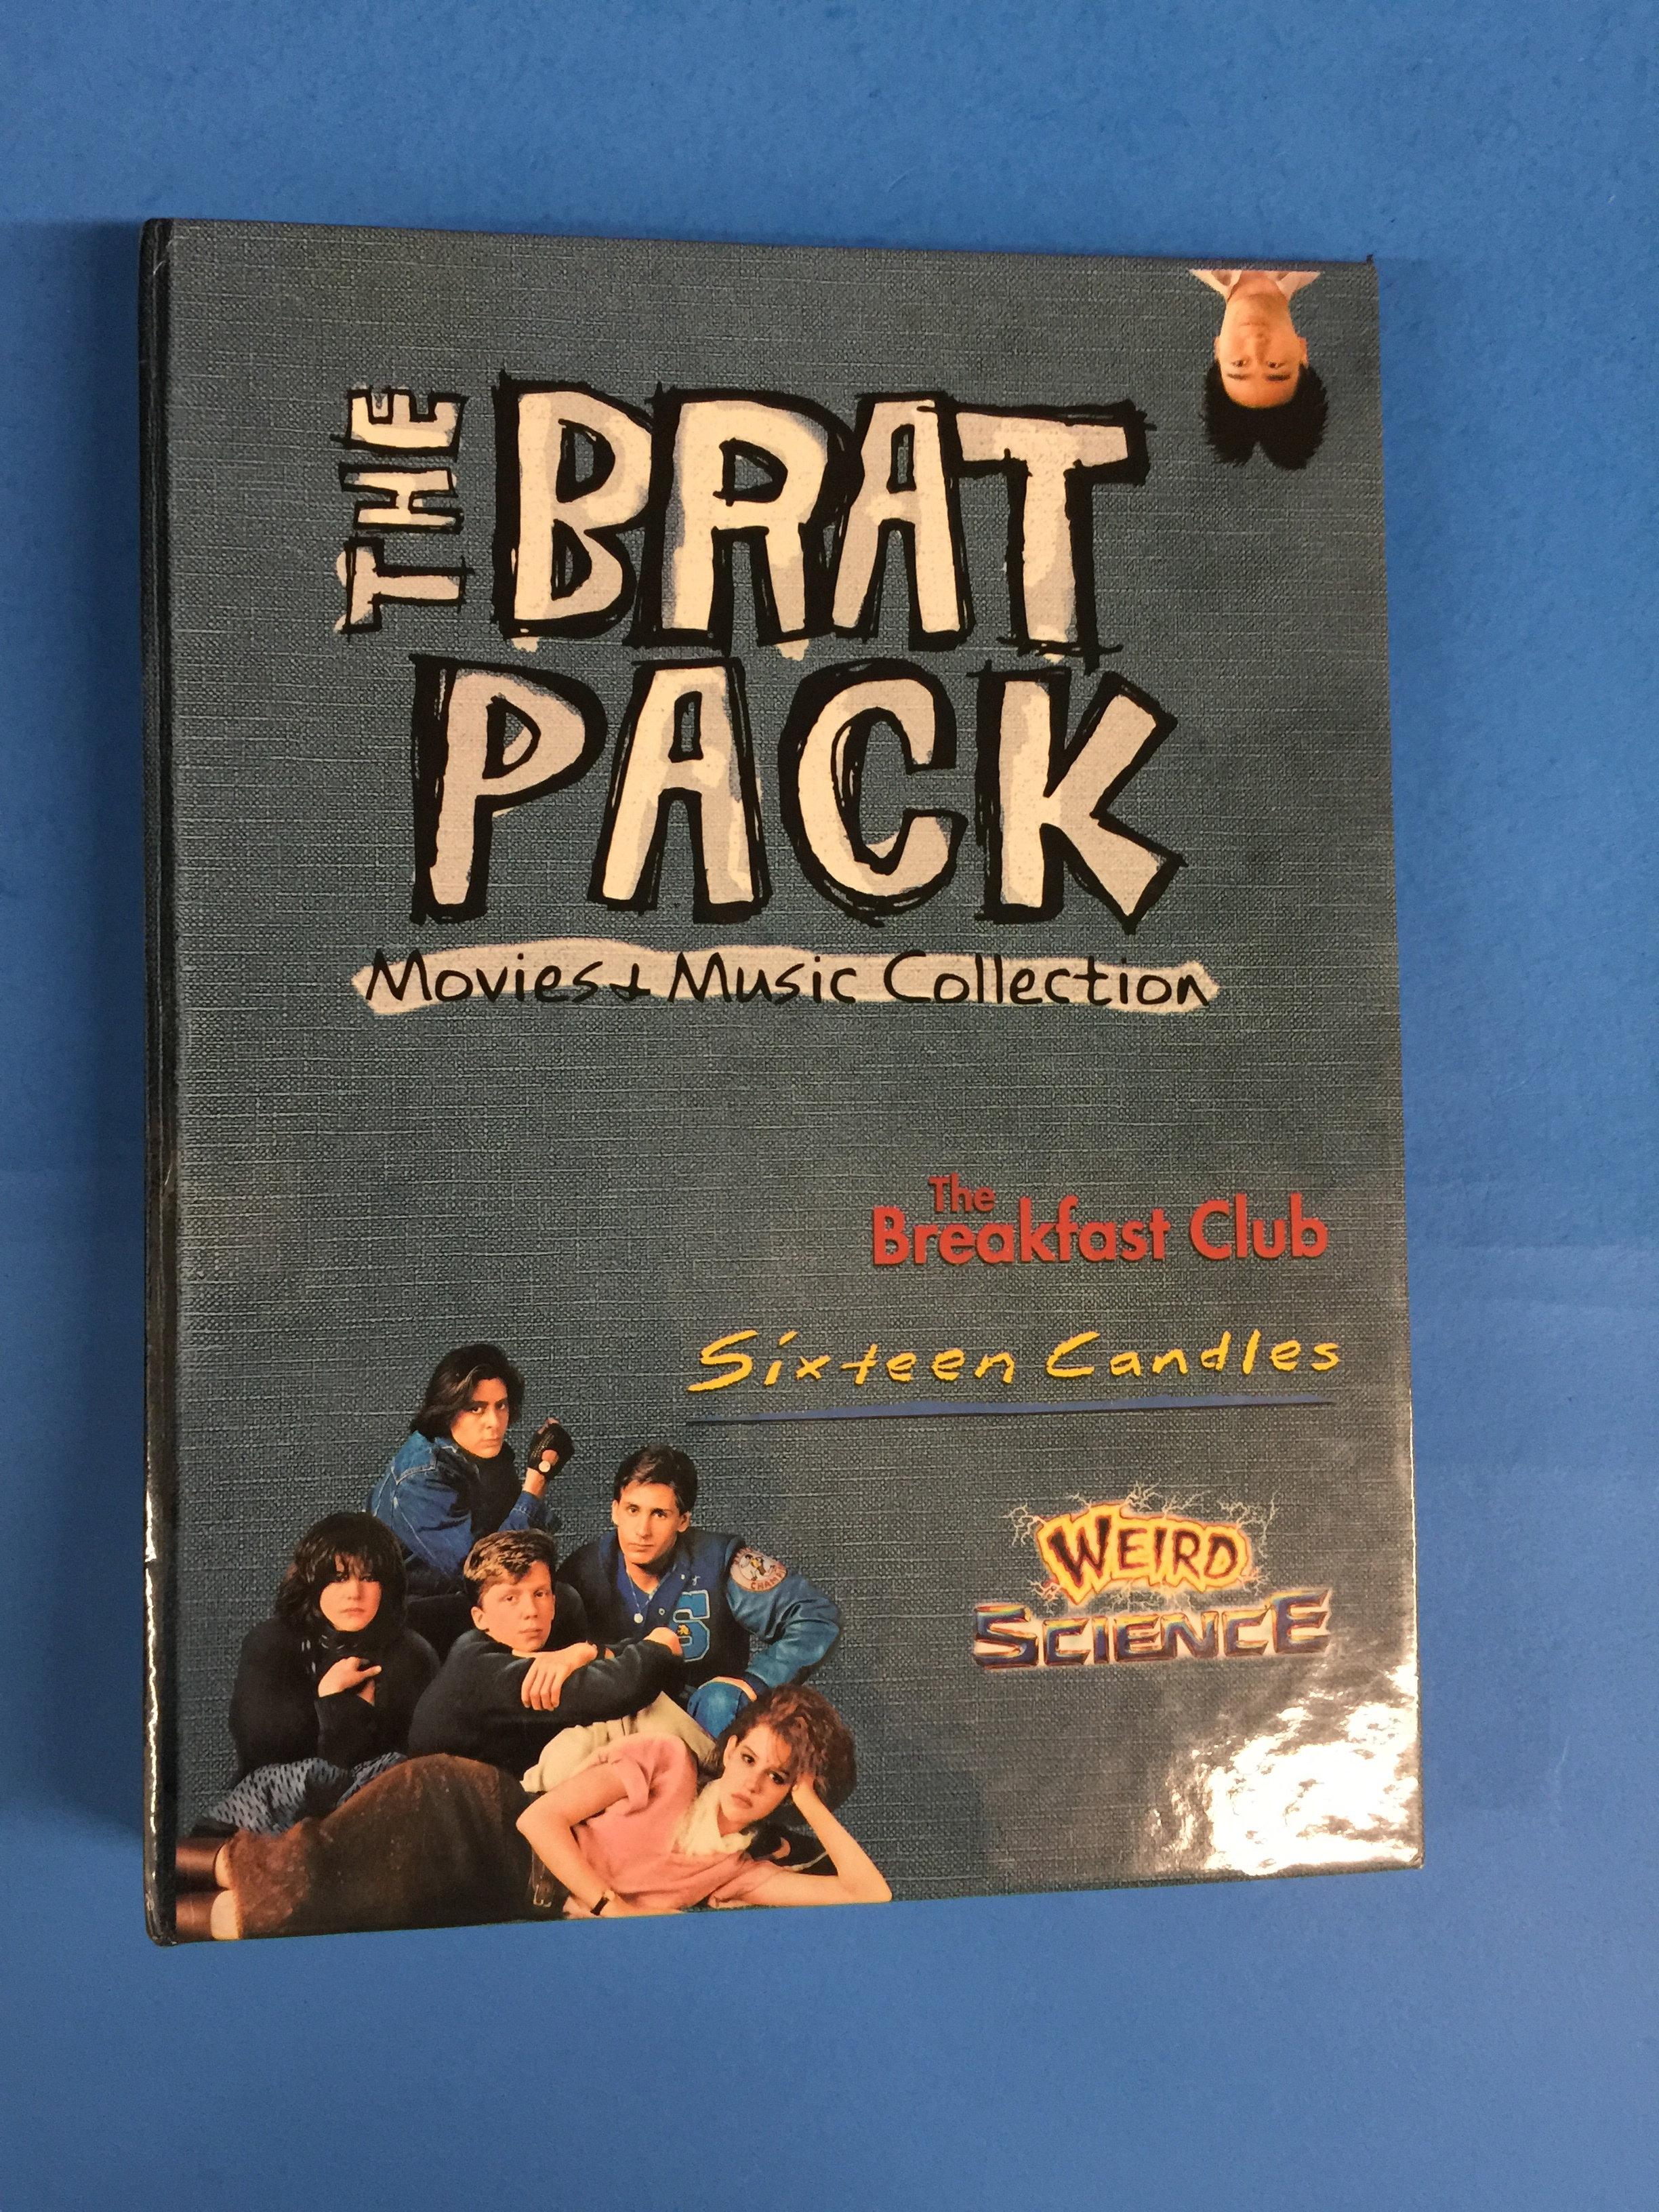 The Brat Pack Movies & Music Collection - Breakfast Club, 16 Candles, Weird Science DVD Set